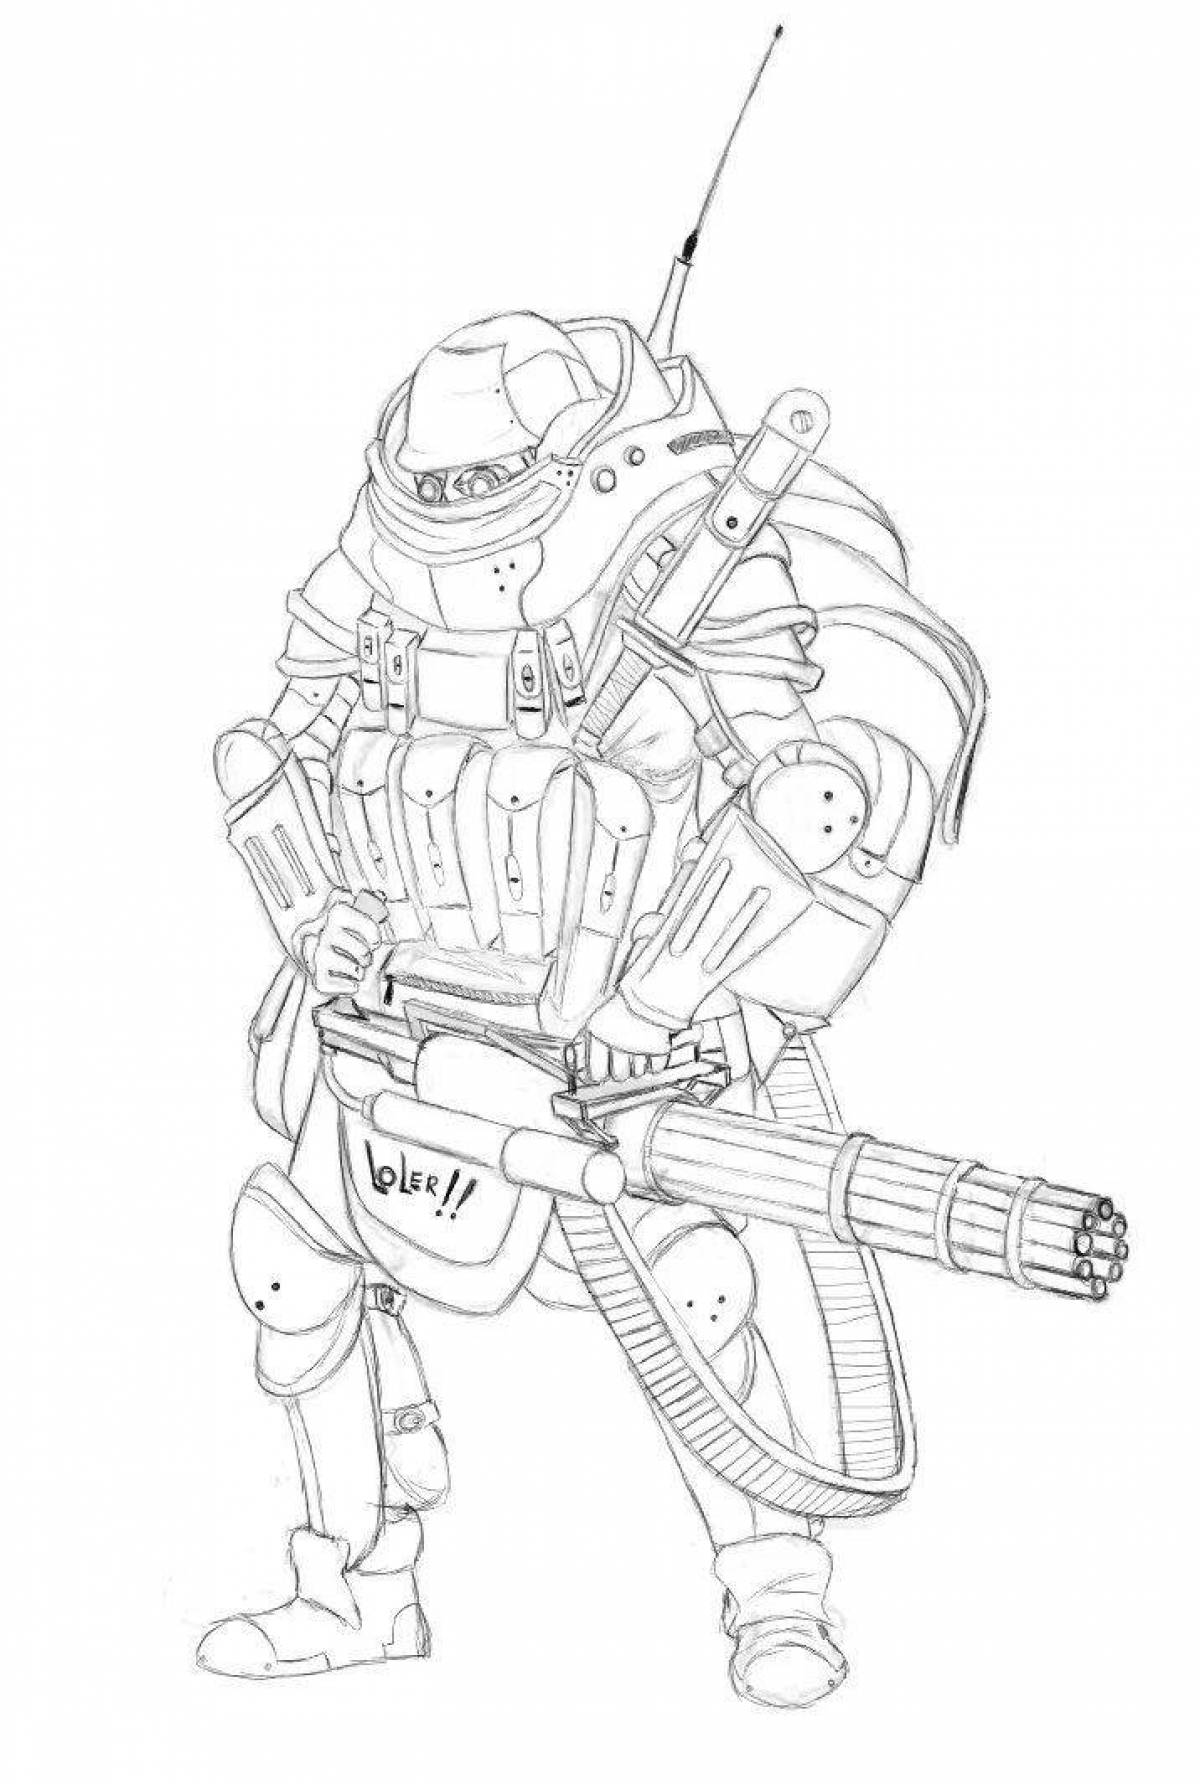 Amazing call of duty coloring page